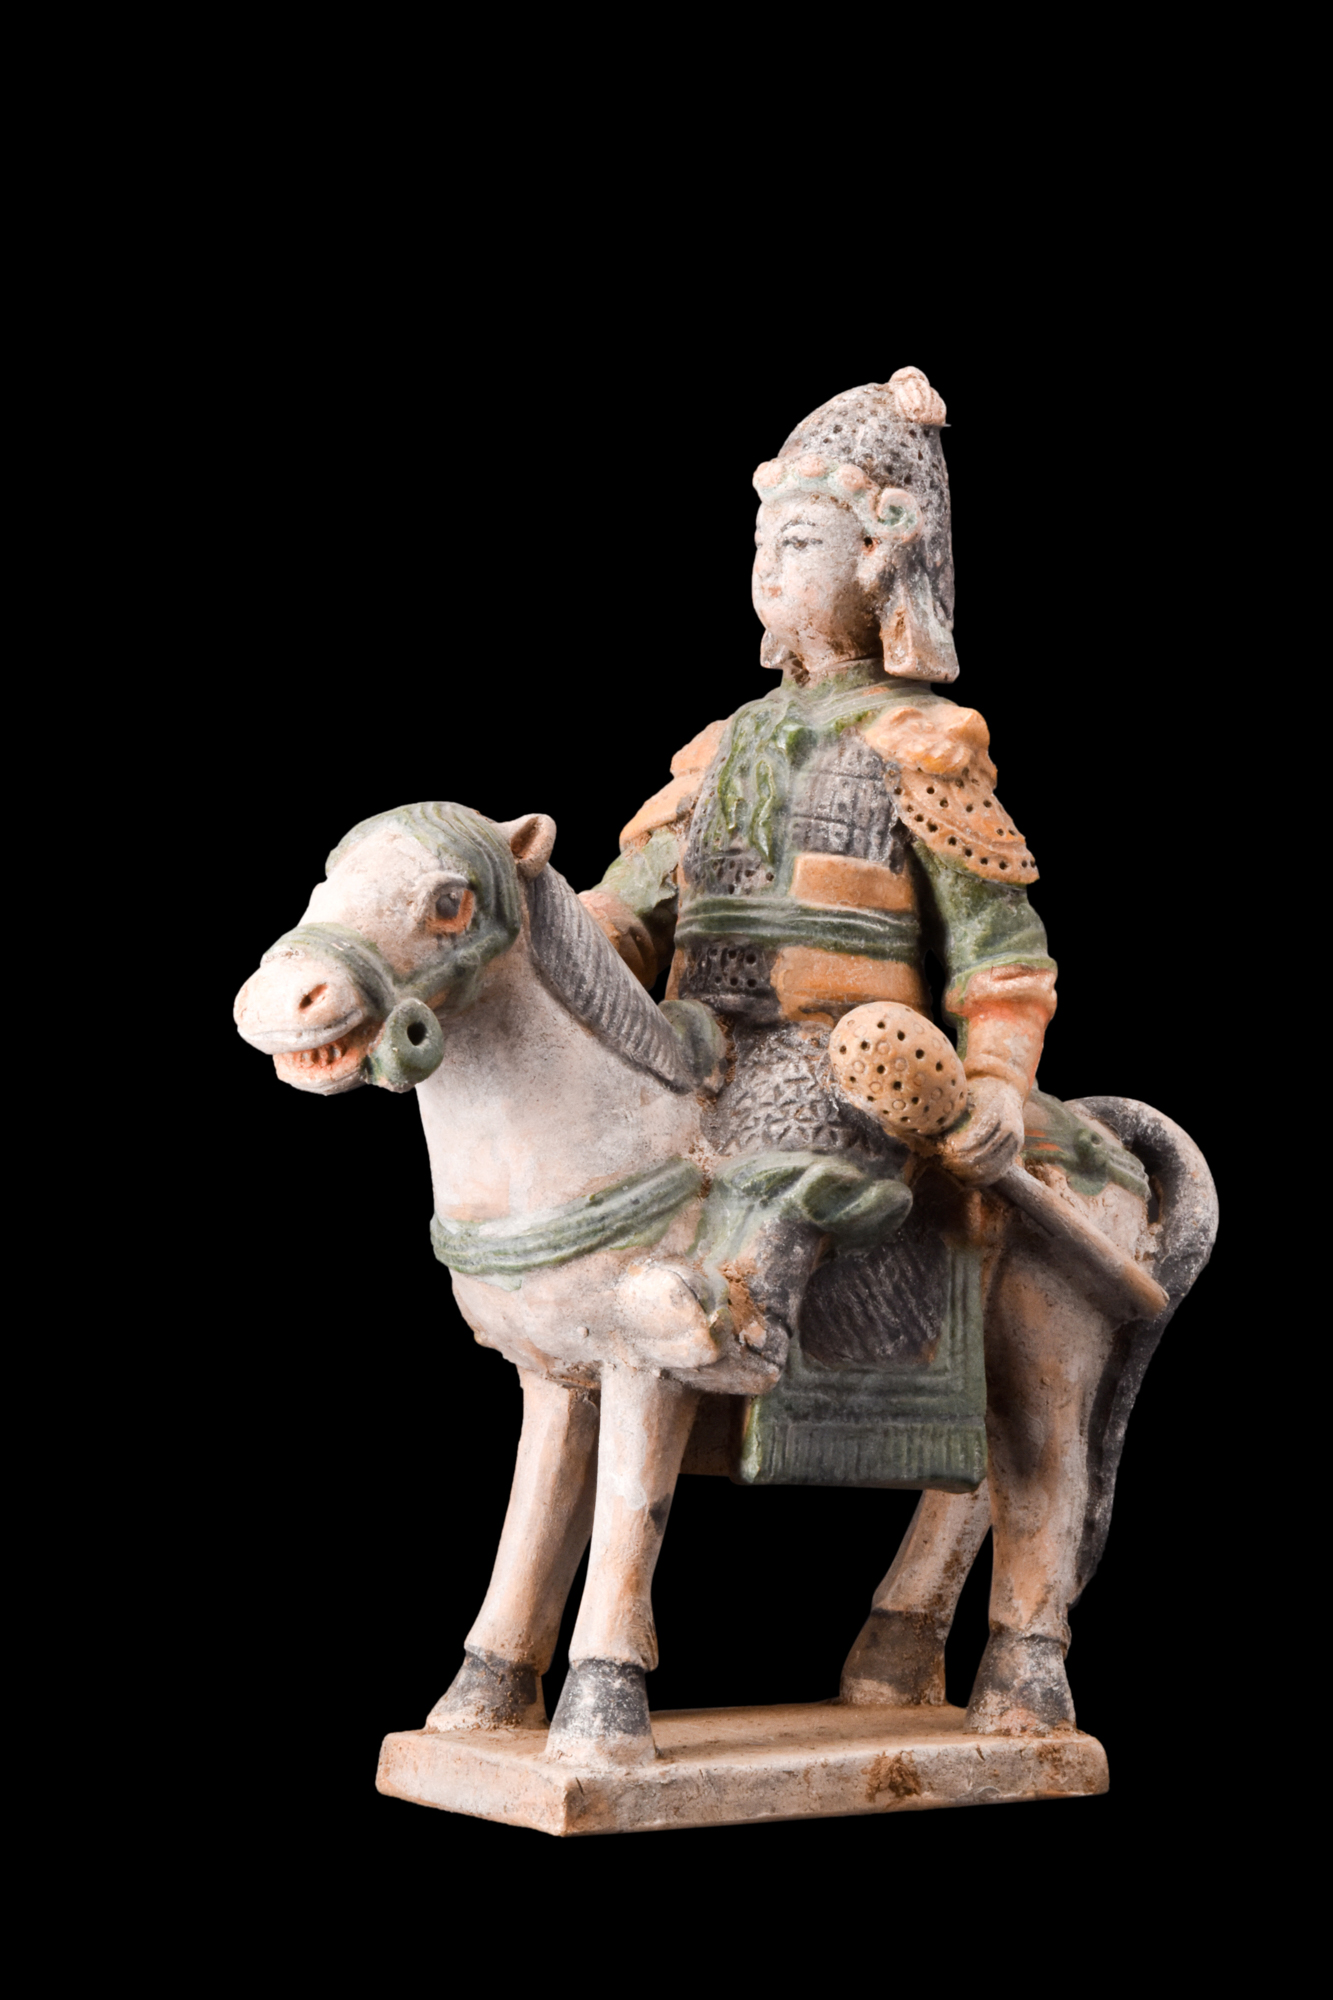 CHINESE MING DYNASTY GLAZED TERRACOTTA RIDER ON A HORSE